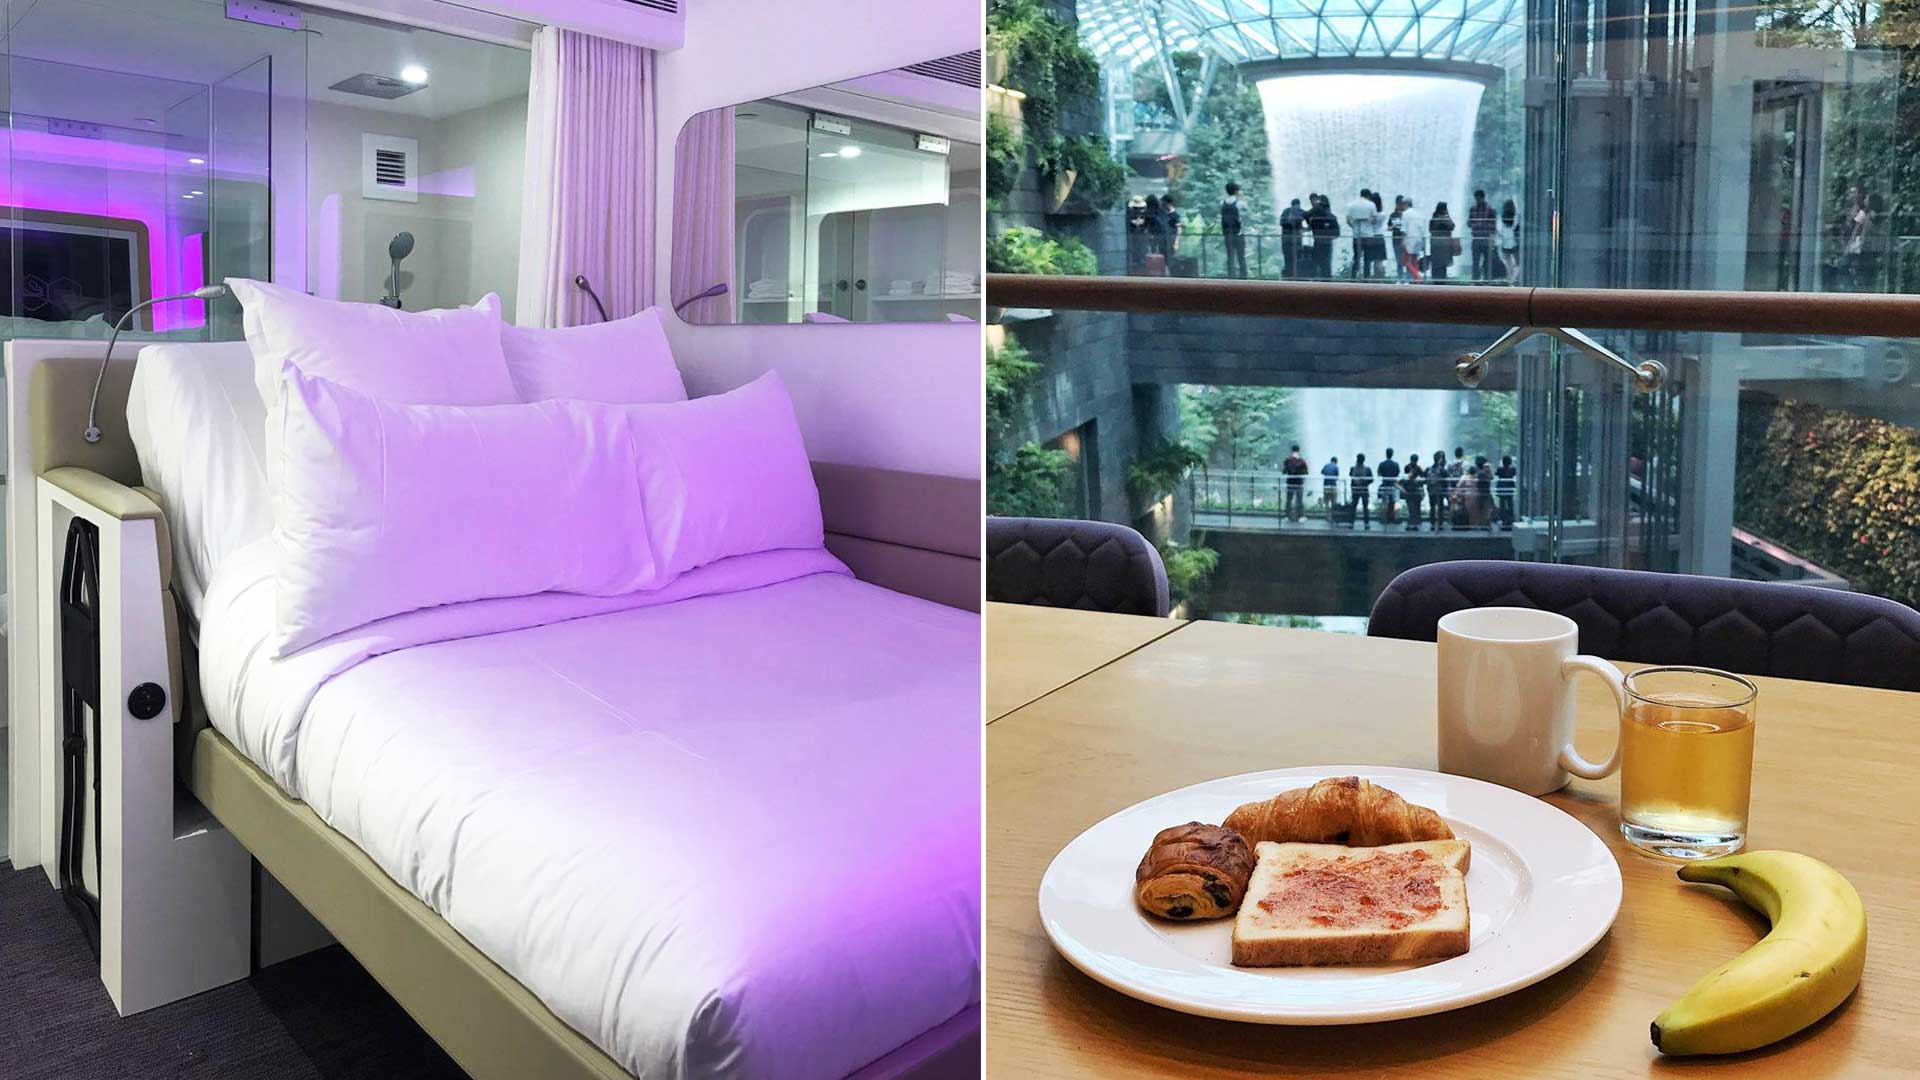 For $140, You Get To Experience Being In A 'First Class Cabin' At This Hotel In Jewel Changi Airport